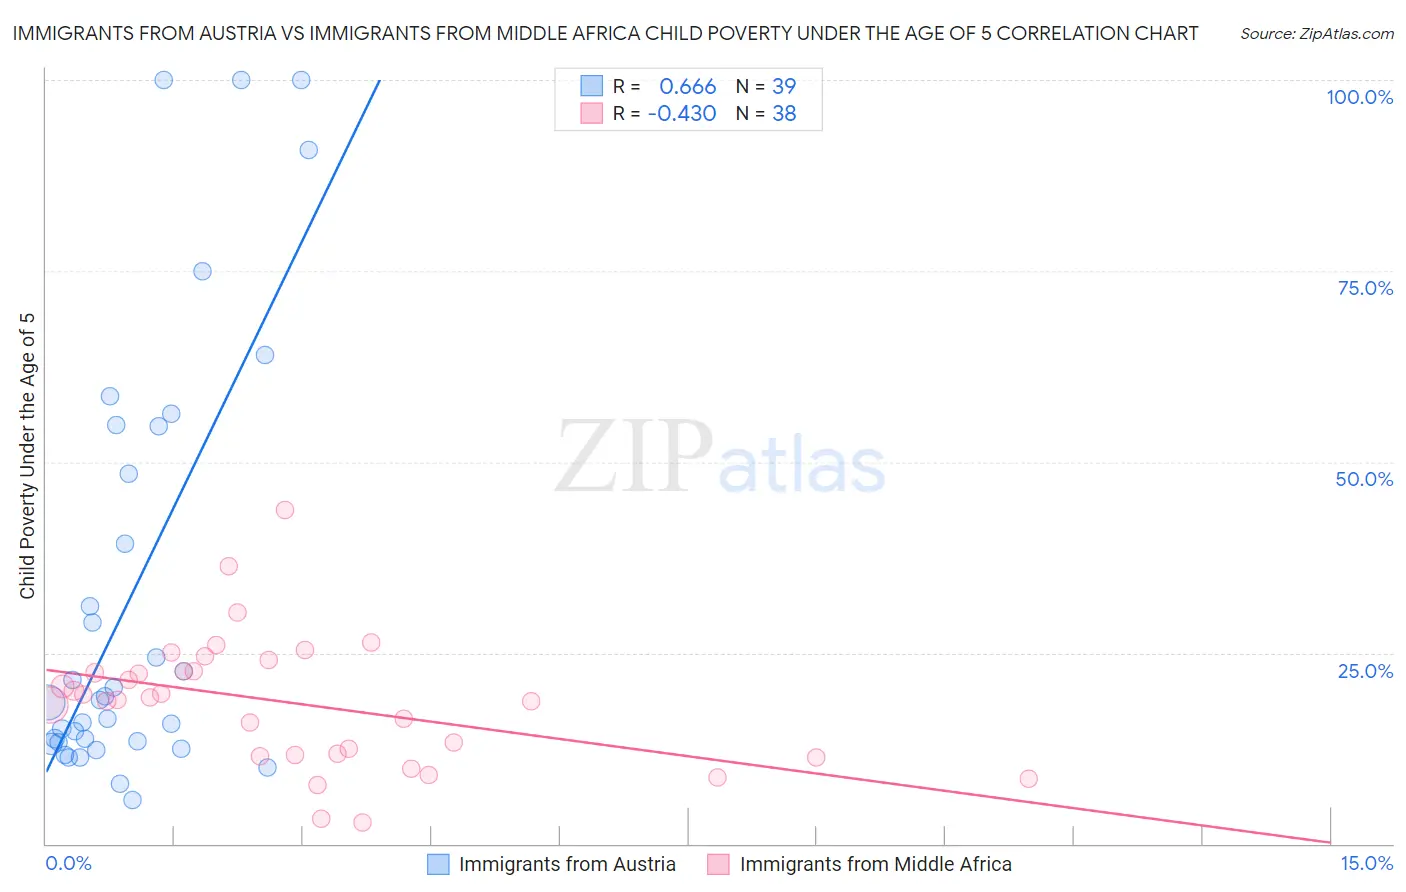 Immigrants from Austria vs Immigrants from Middle Africa Child Poverty Under the Age of 5